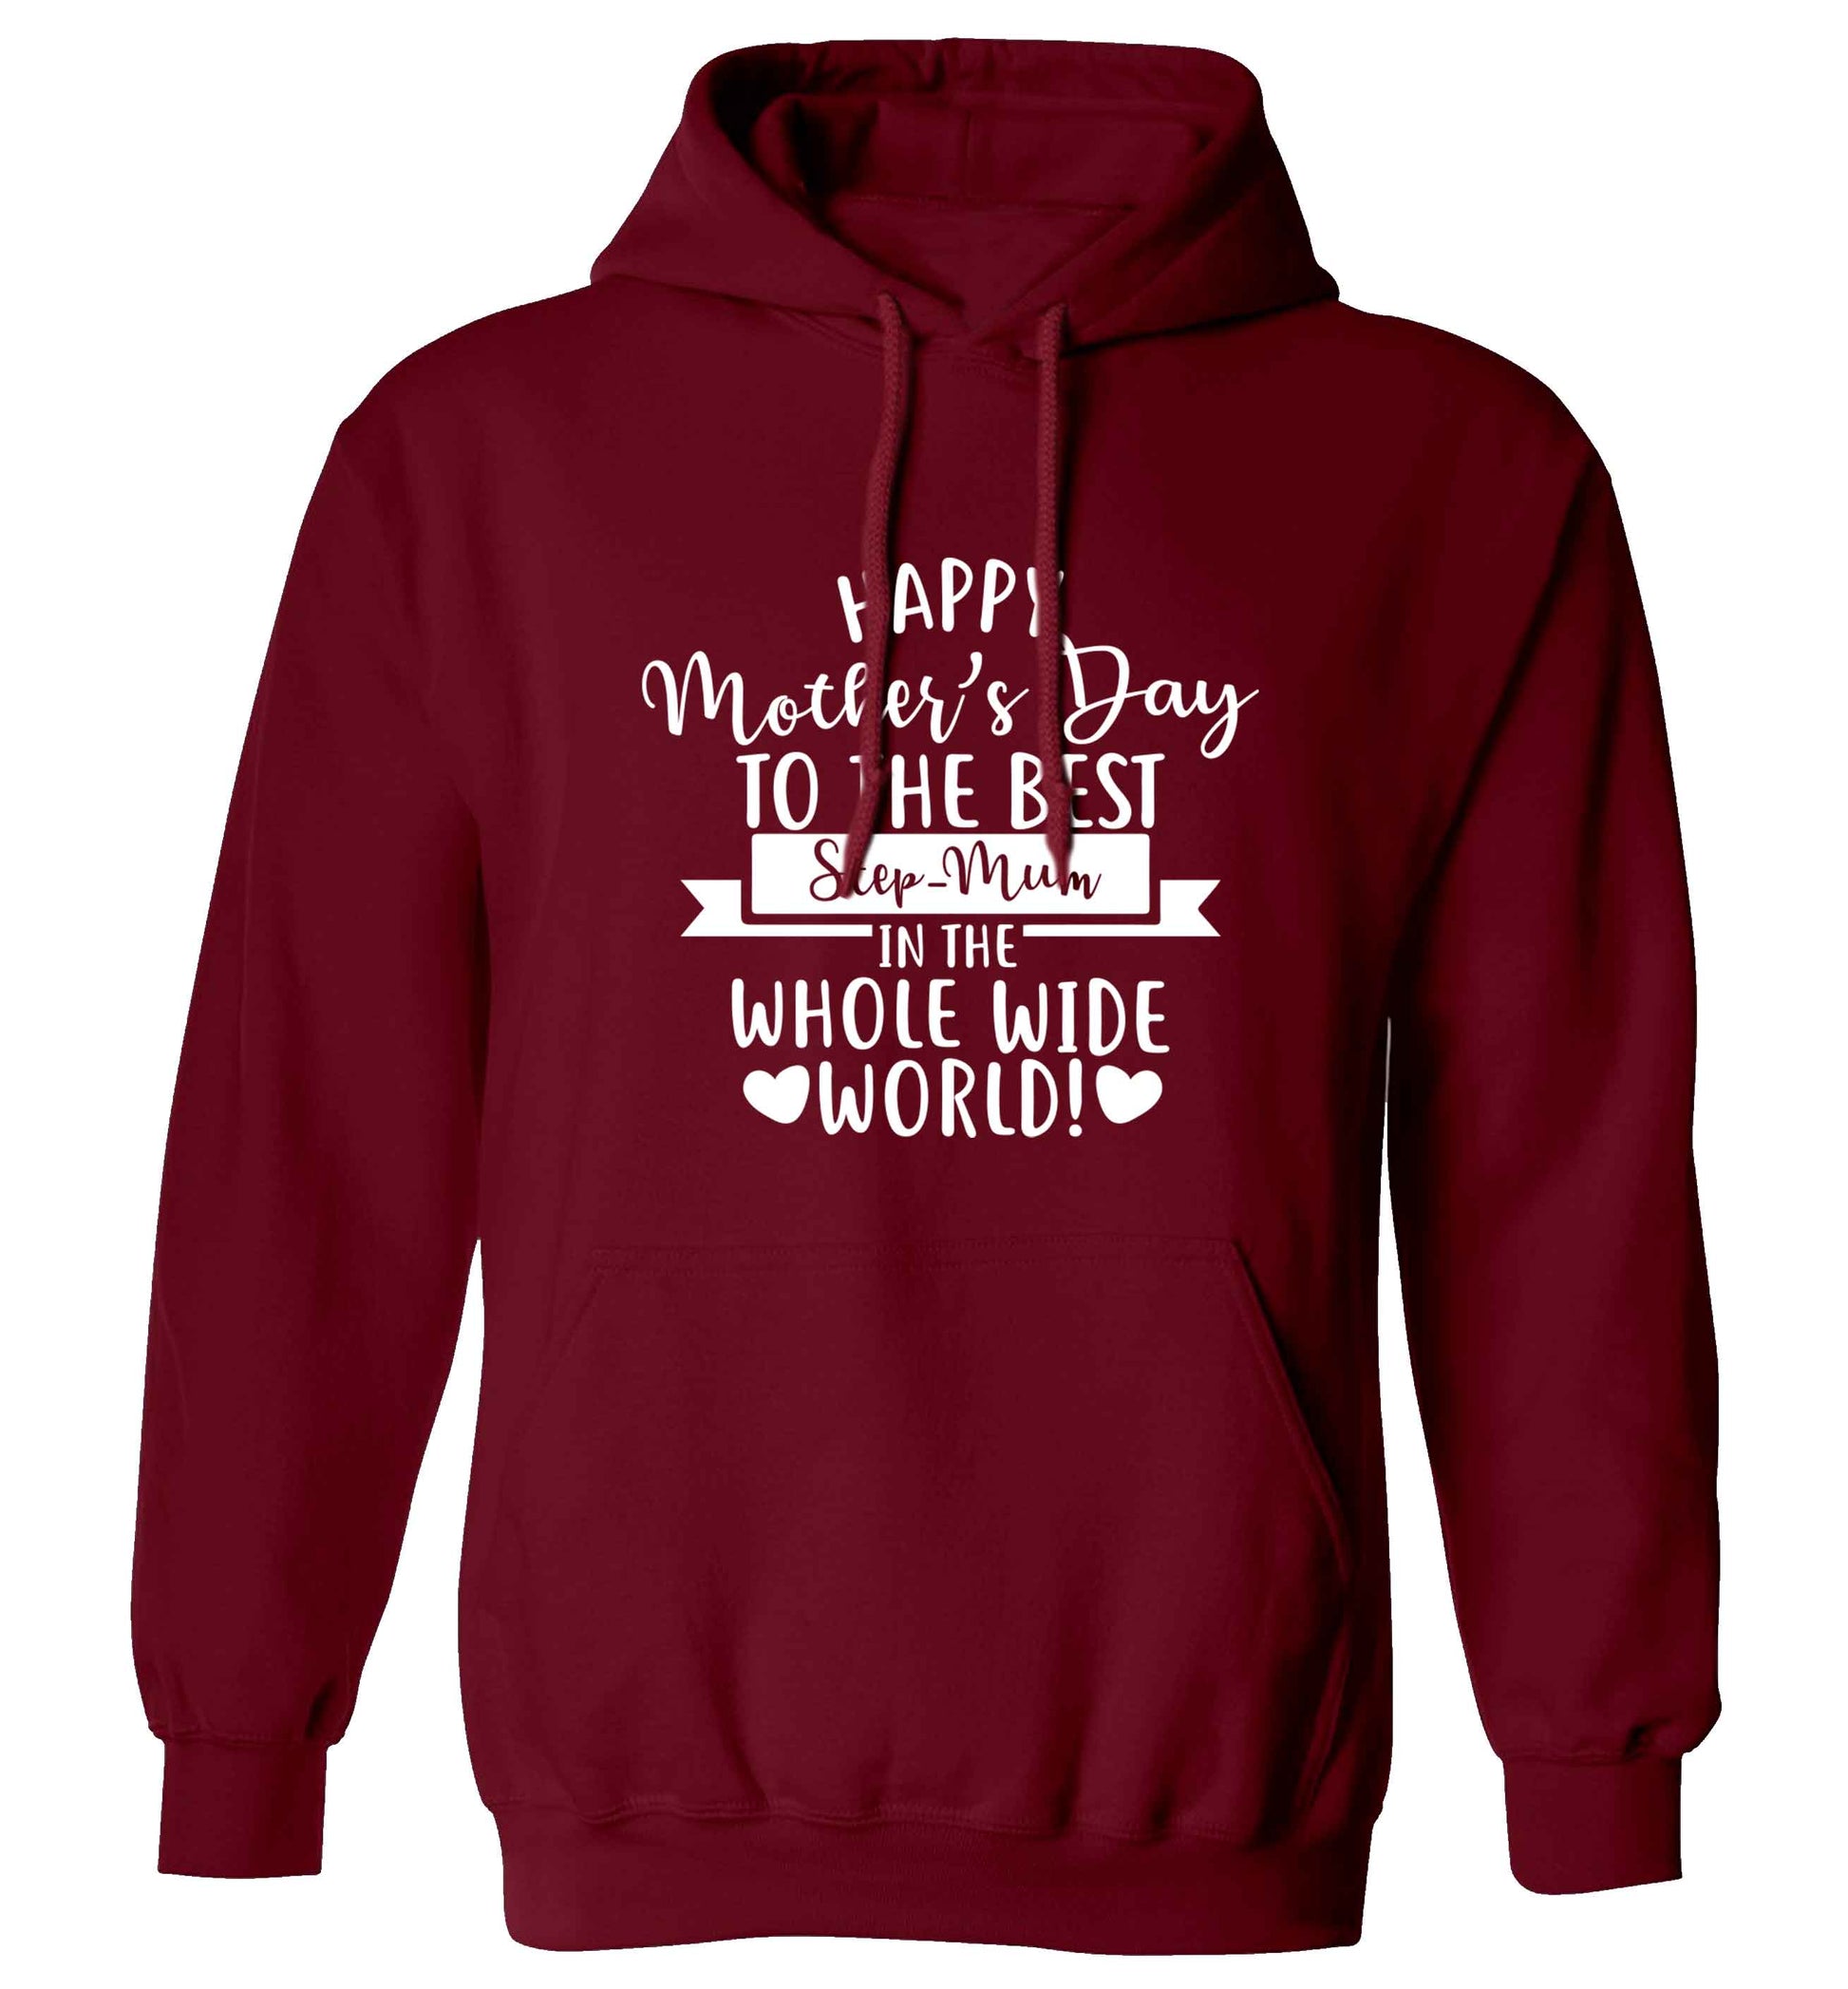 Happy mother's day to the best step-mum in the world adults unisex maroon hoodie 2XL